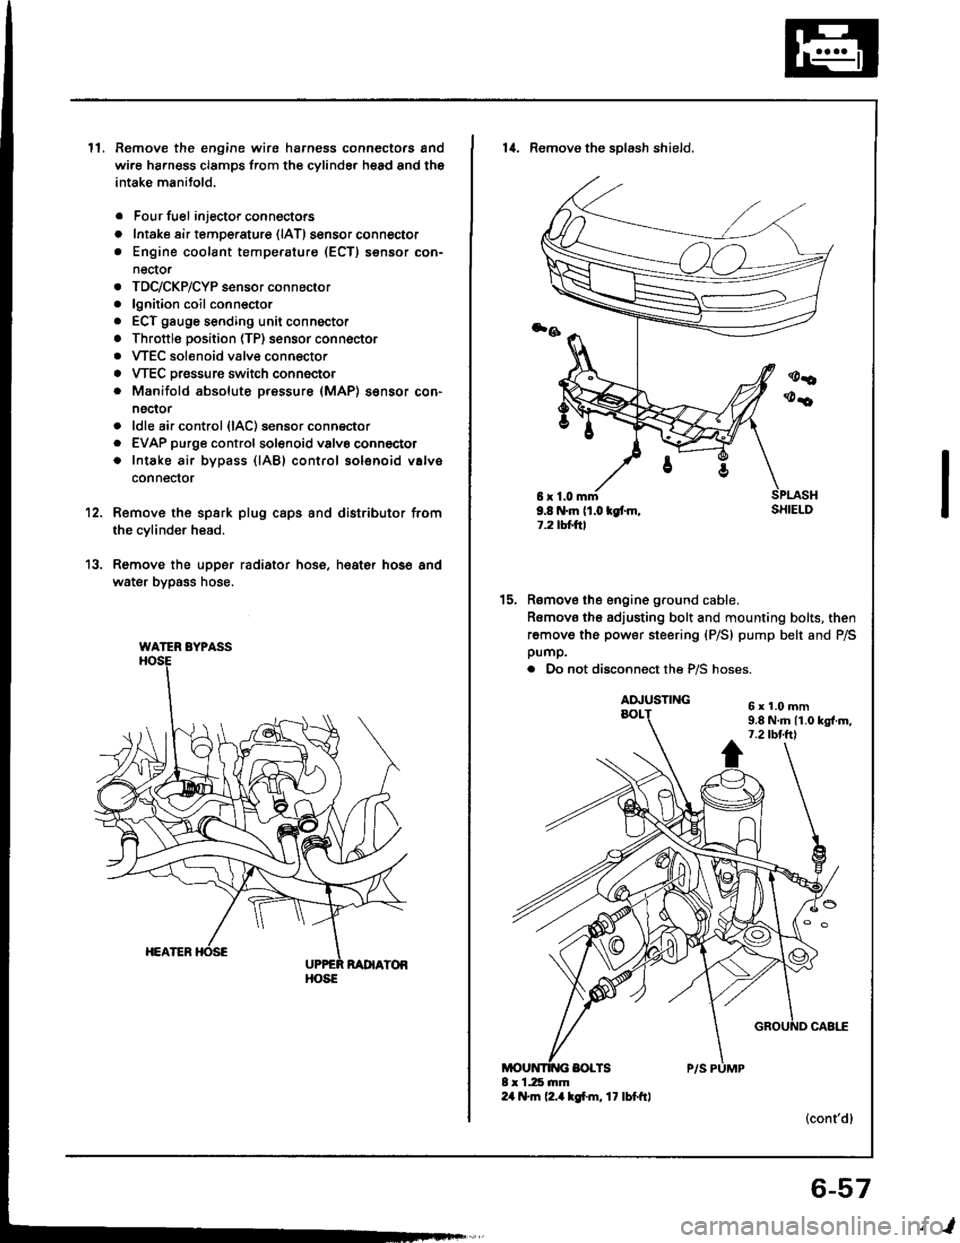 HONDA INTEGRA 1994 4.G Workshop Manual ll.Remove the engine wire harness connectors and
wi.e ha.ness clamps from the cylinder head and the
intake manitold.
Four fuel injector connectors
Intake air tempe.ature {lAT) sensor connector
Engine 